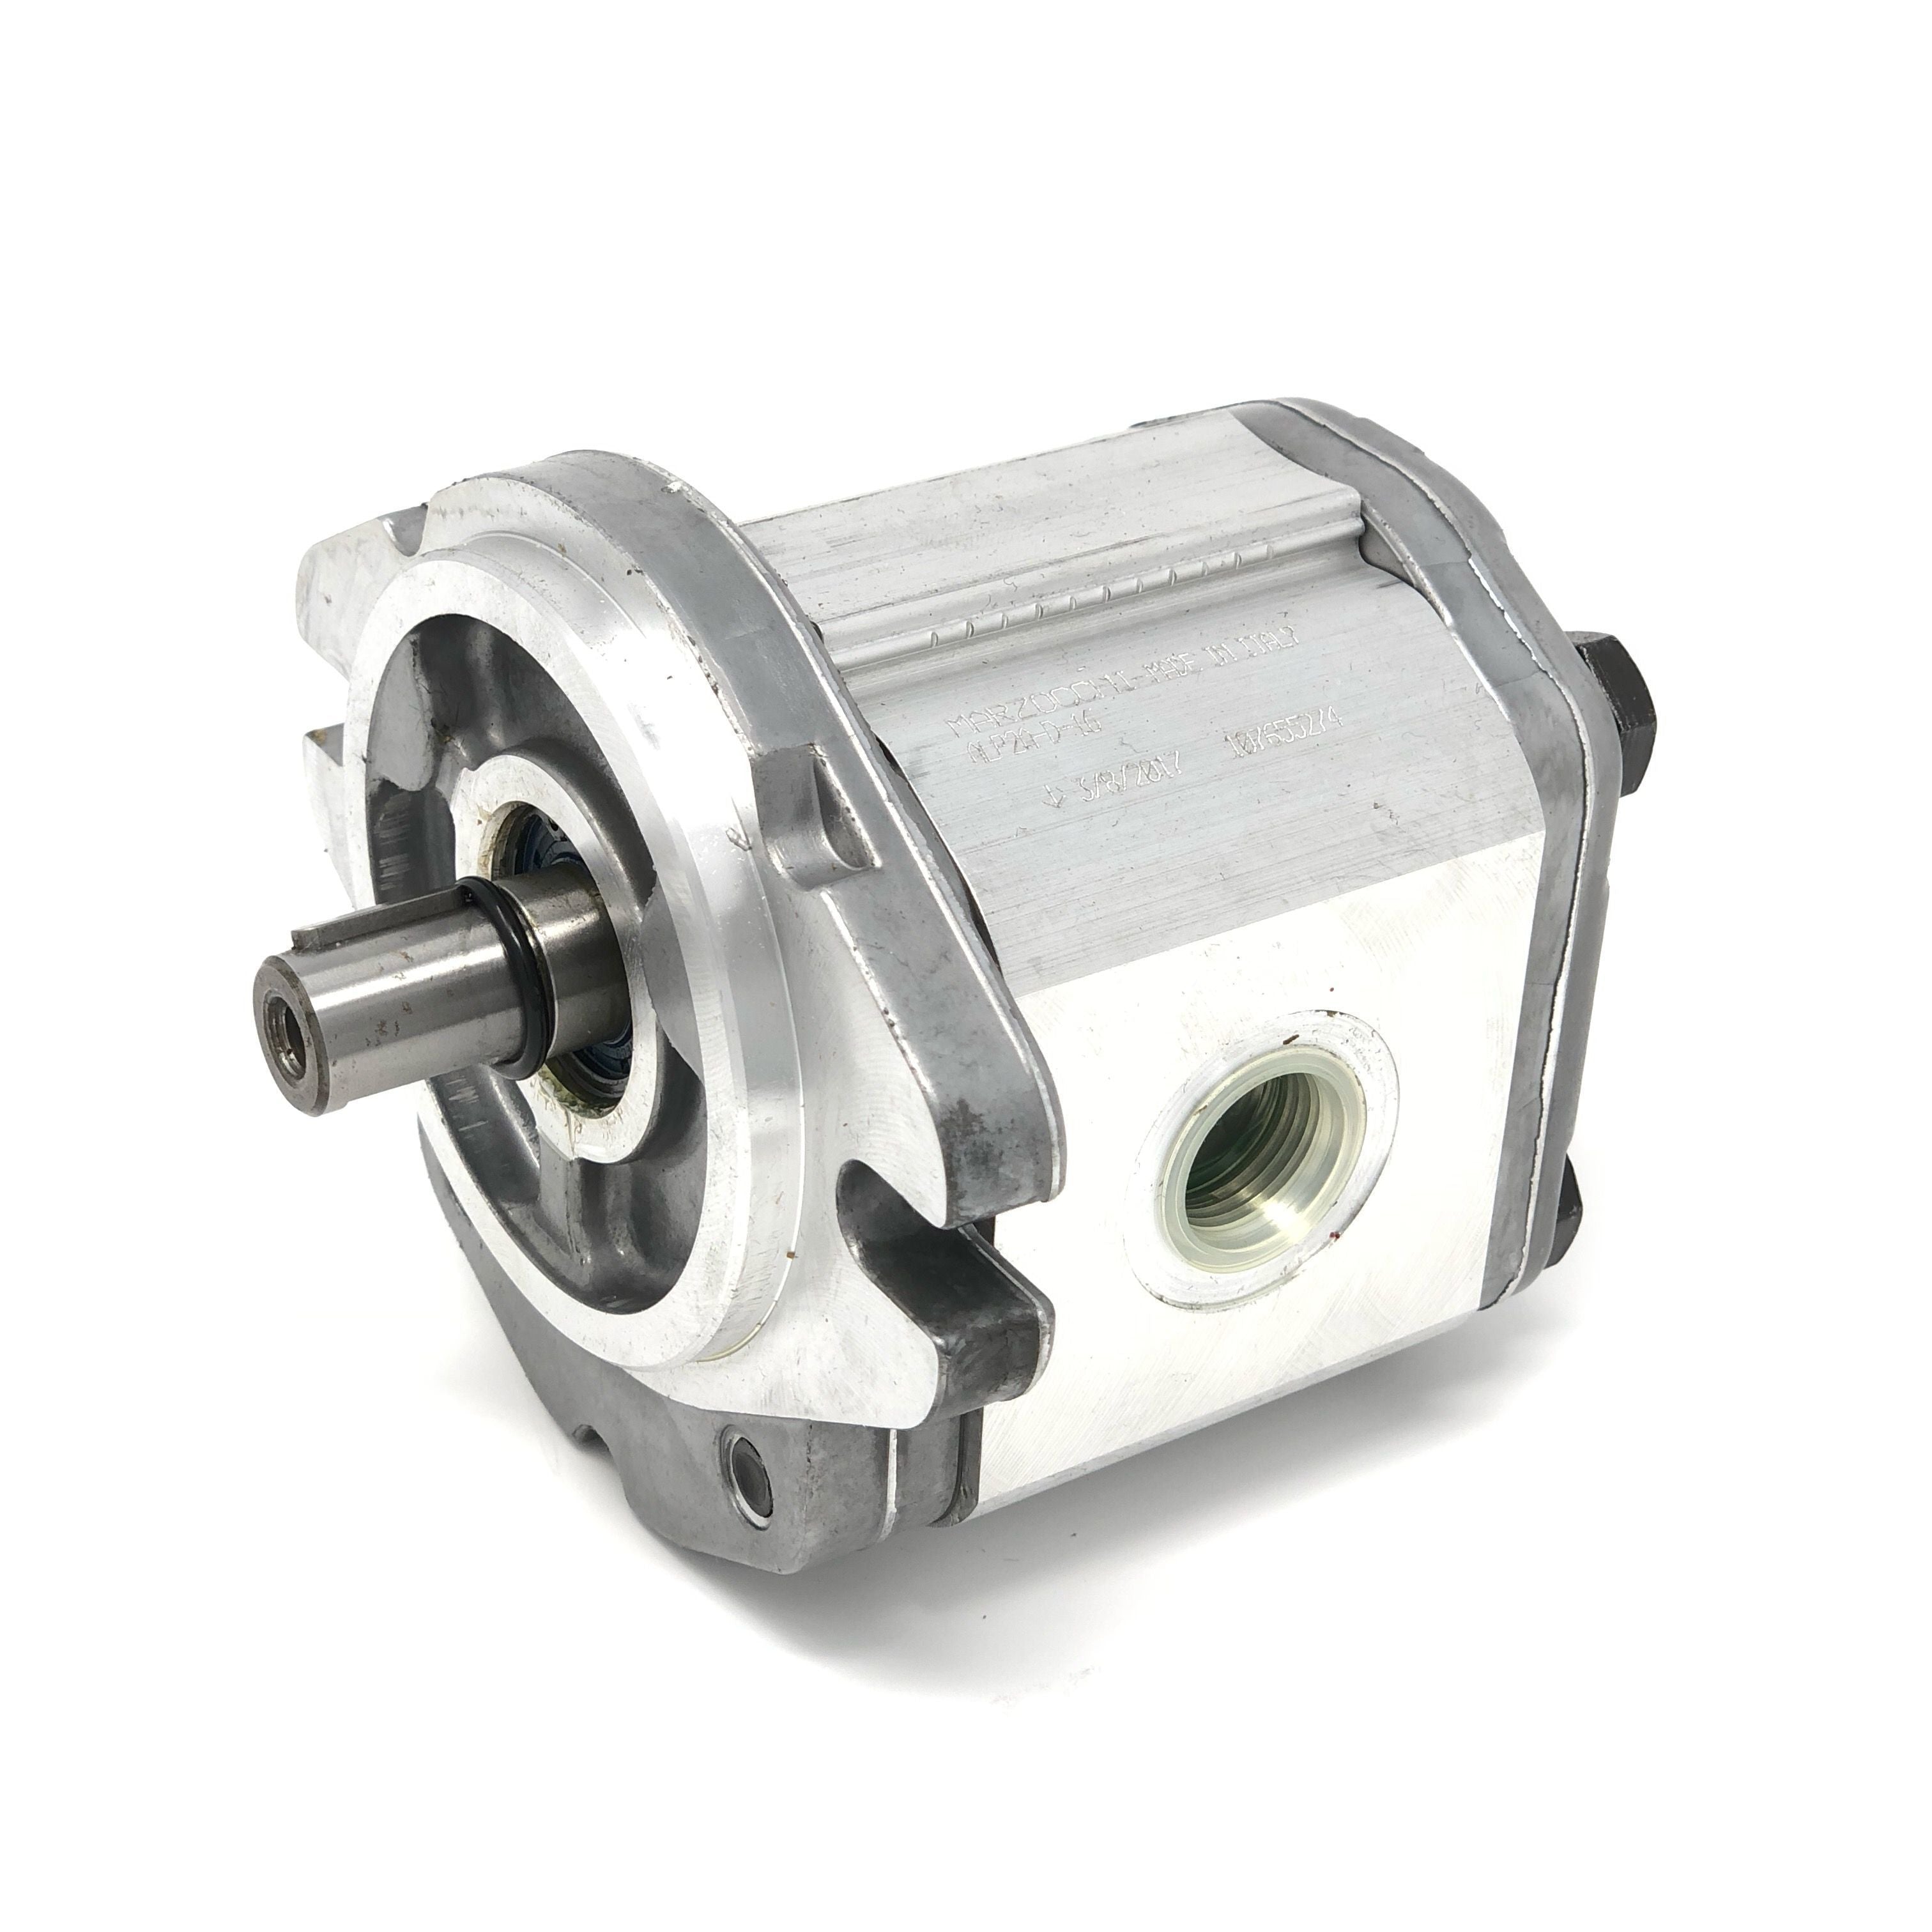 ALP2A-D-50 : Marzocchi Gear Pump, CW, 35.2cc (2.1472in3), 16.73 GPM, 2030psi, 2000 RPM, #12 SAE (3/4") In, #10 SAE (5/8") Out, Keyed Shaft 5/8" Bore x 5/32" Key, SAE A 2-Bolt Mount